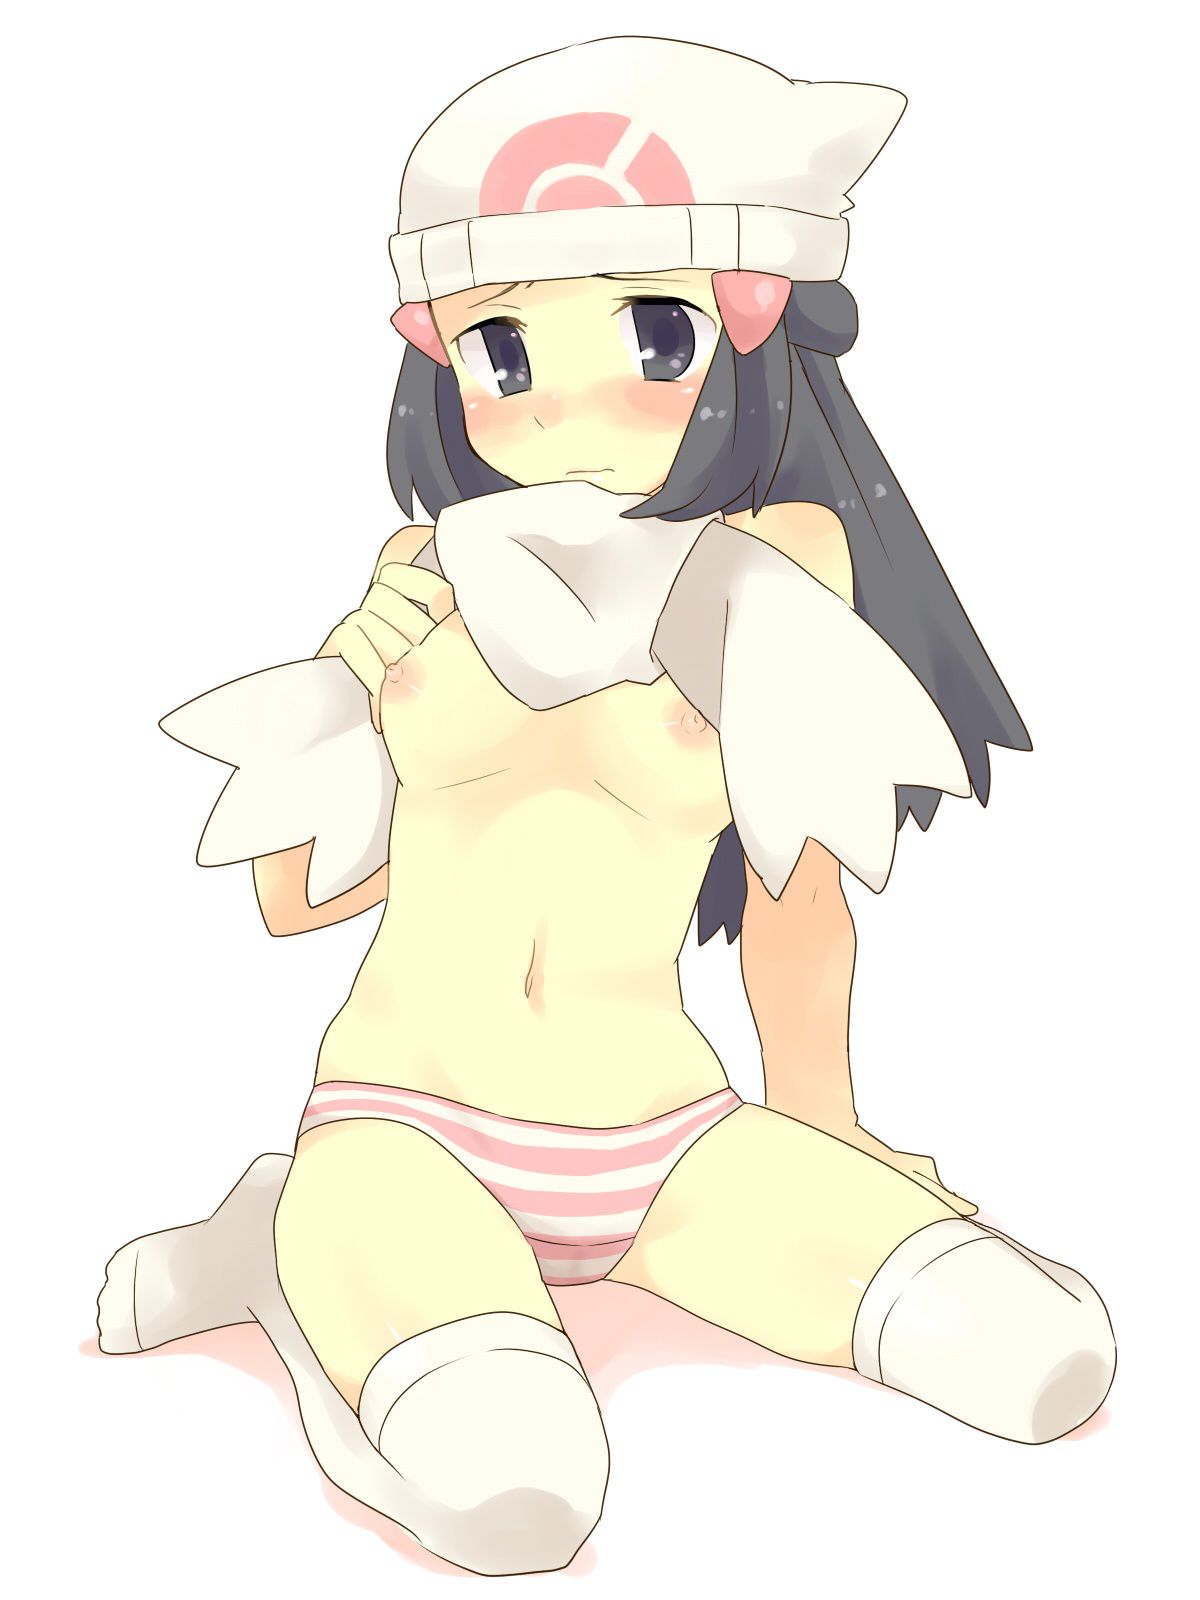 【Pocket Monsters】Cute erotic image summary that comes through with Hikari's echi 3